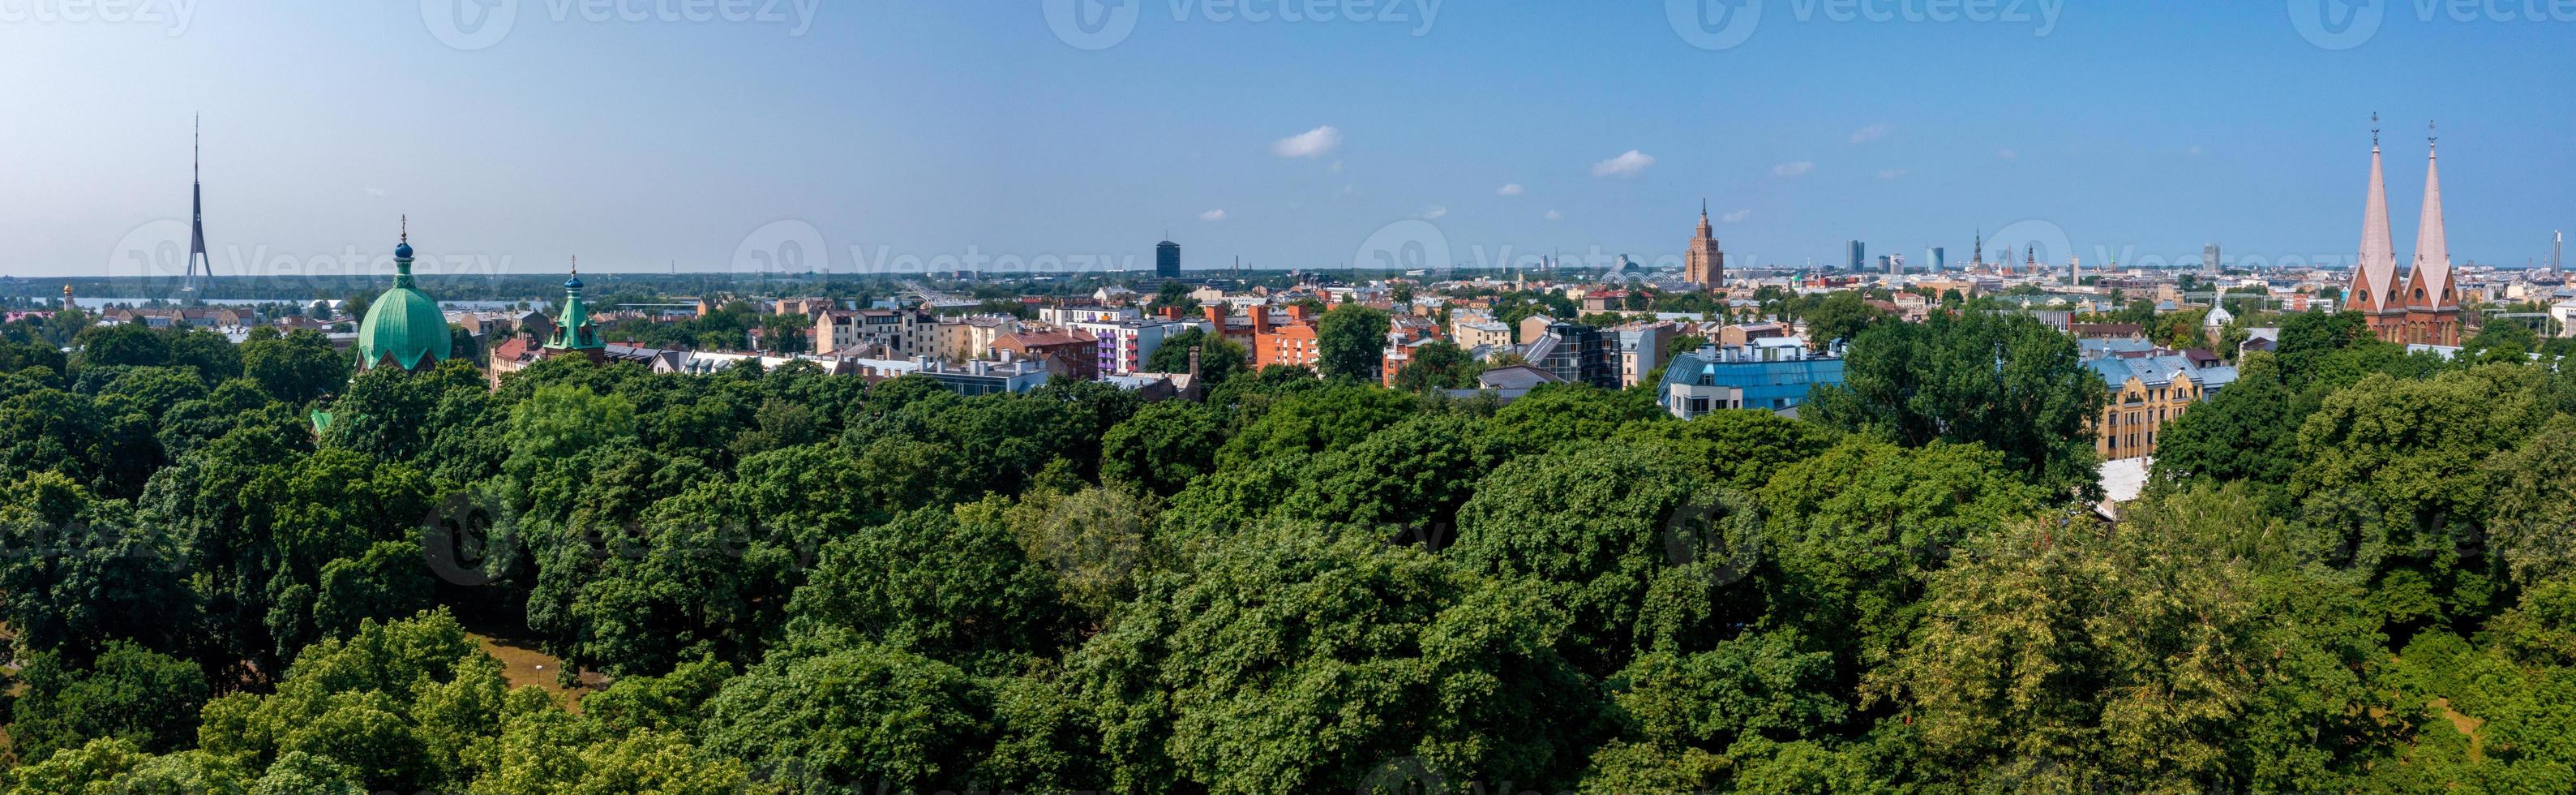 Beautiful aerial view of the Riga city from above. photo